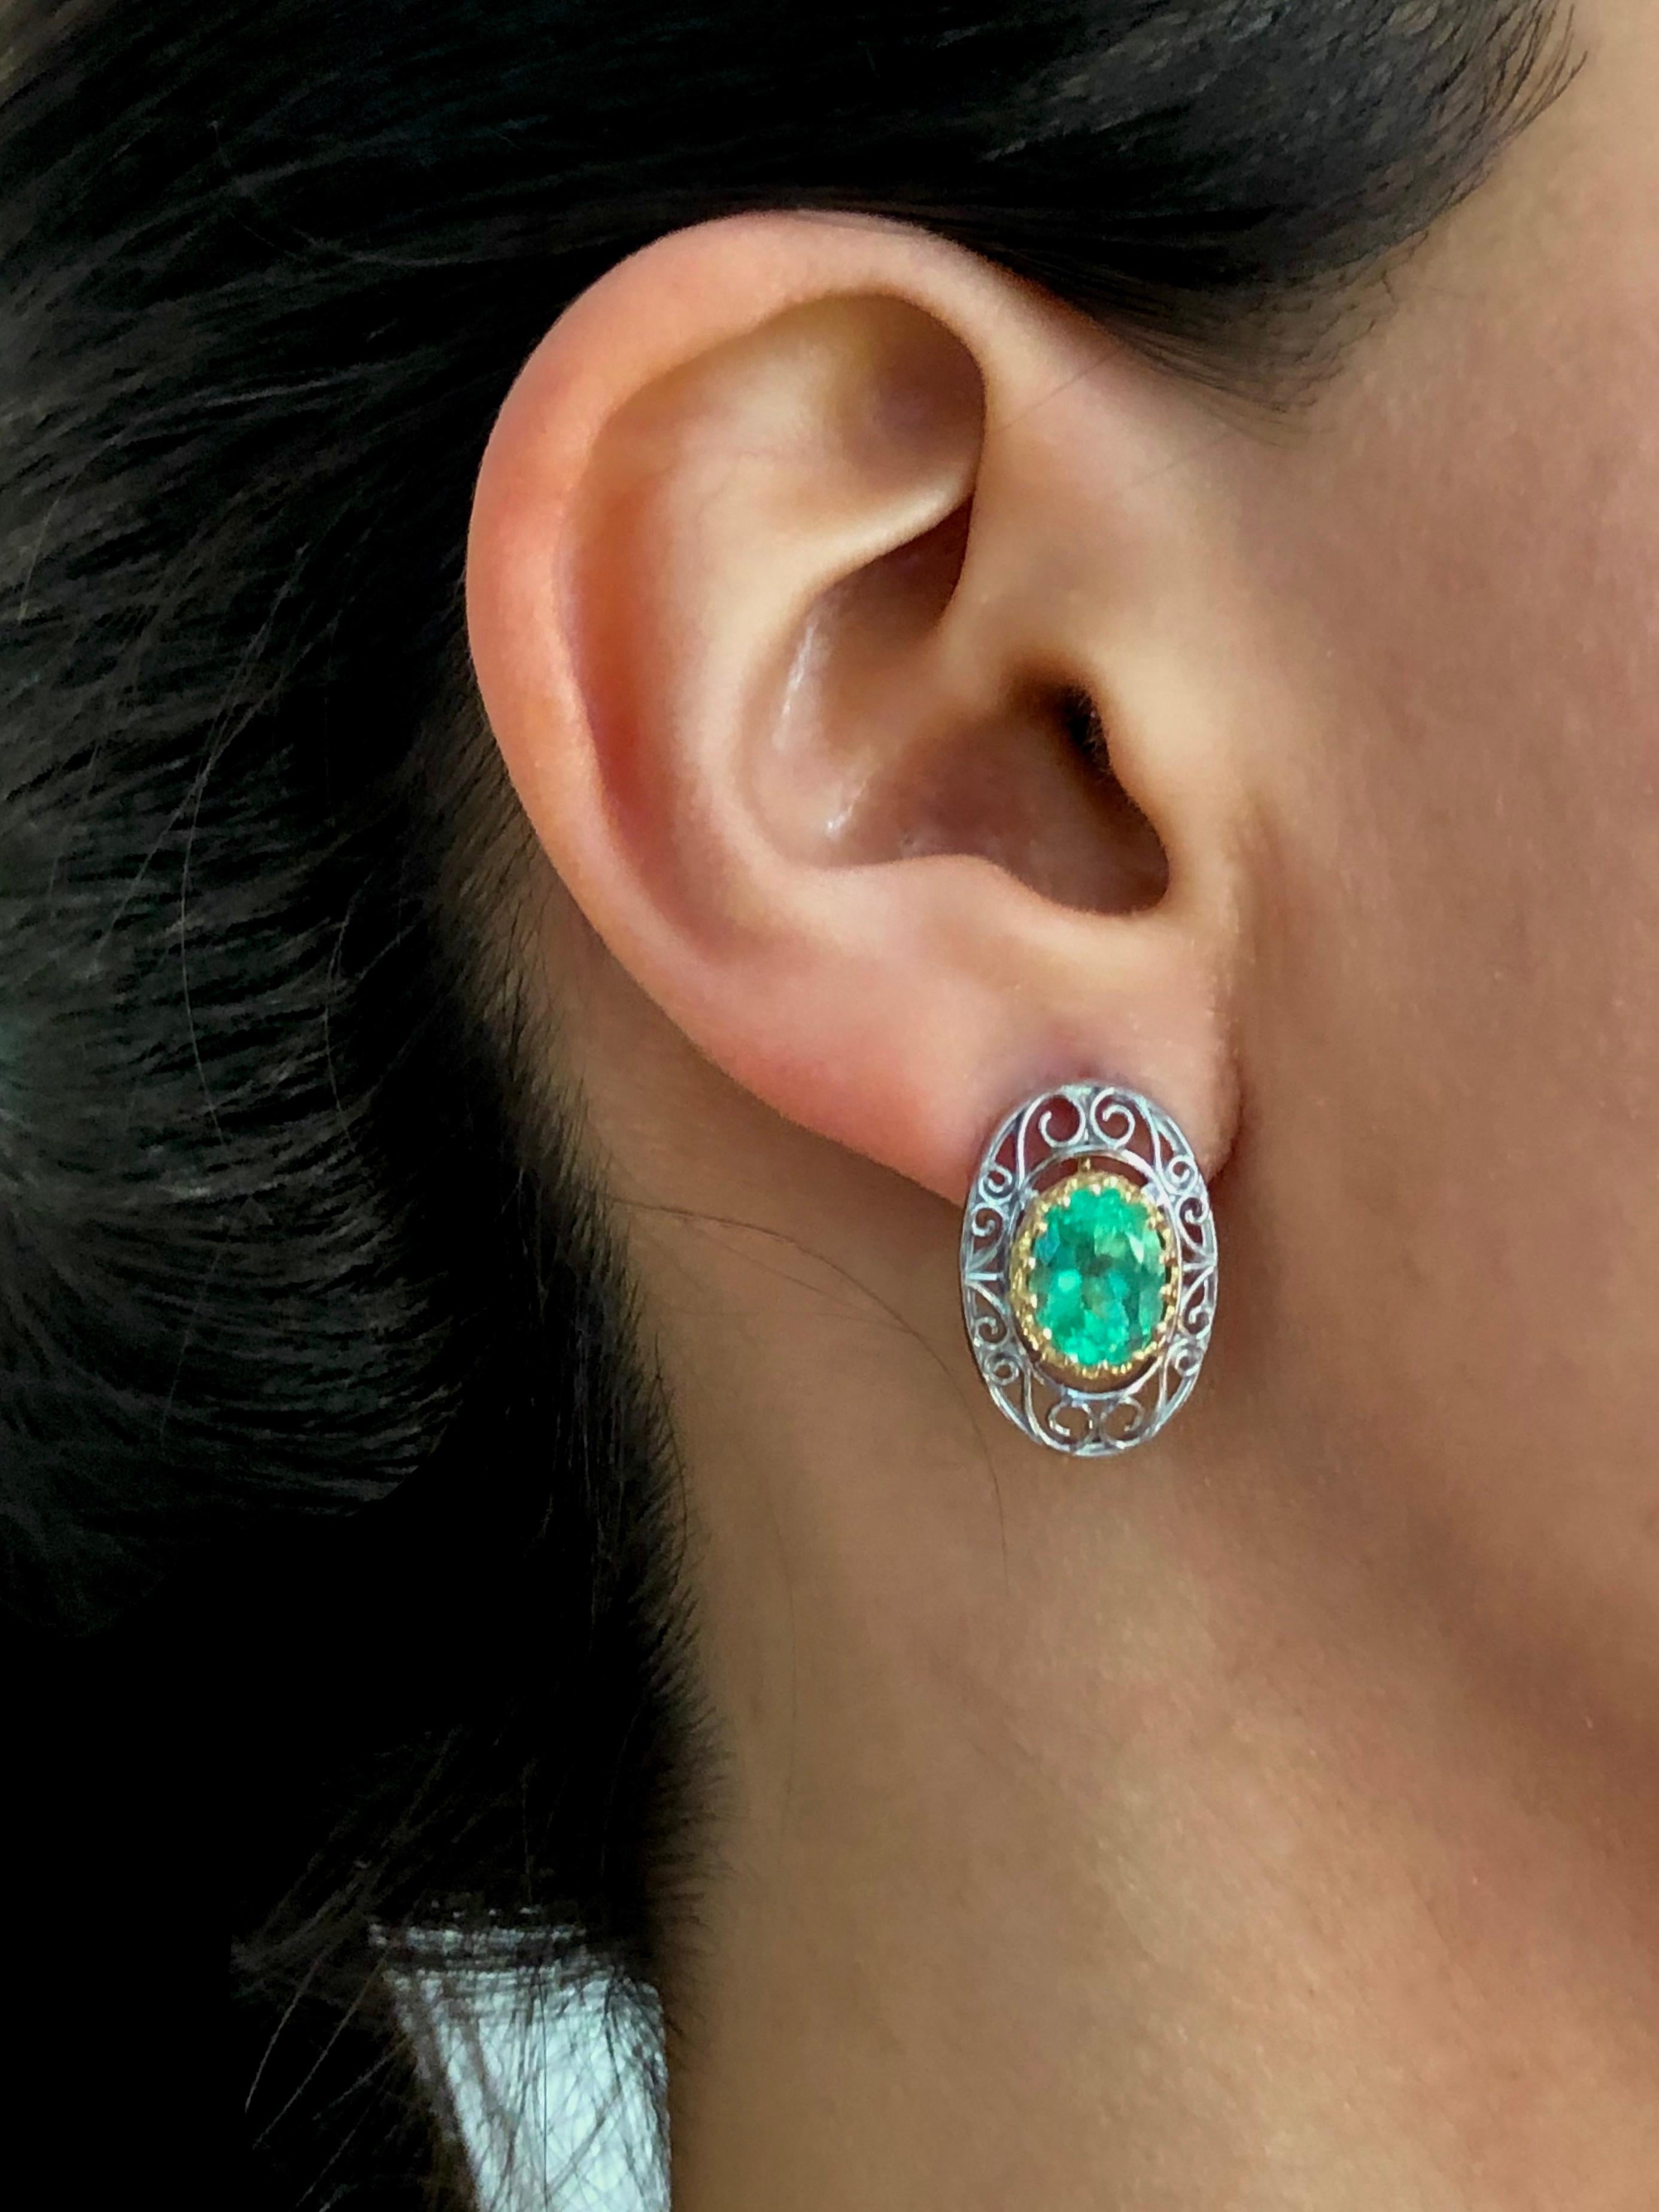 This pair of classic antique-Inspired scroll style earrings 18K yellow gold and platinum earrings is set with two natural Colombian emeralds 4.0 carats (each 2.00ct) framed by crown bezel 18K gold.
Measure 20.5 x 13.5 mm
Total length with ear wire